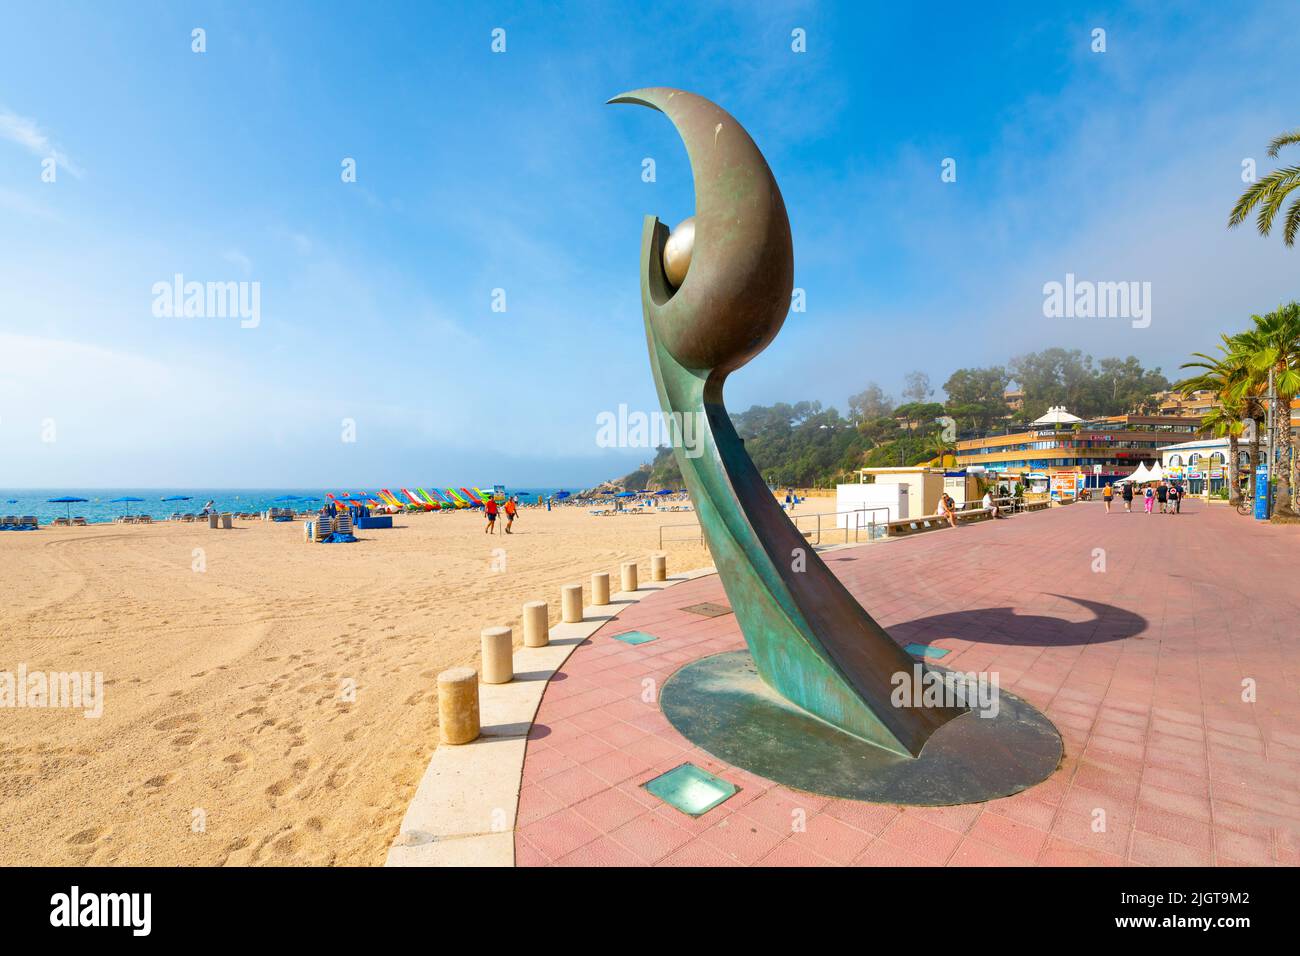 The metal, modern waterfront sculpture, Monument L'Esguard along the sandy beach at the resort town of Lloret de Mar, Spain, on the Costa Brava coast. Stock Photo